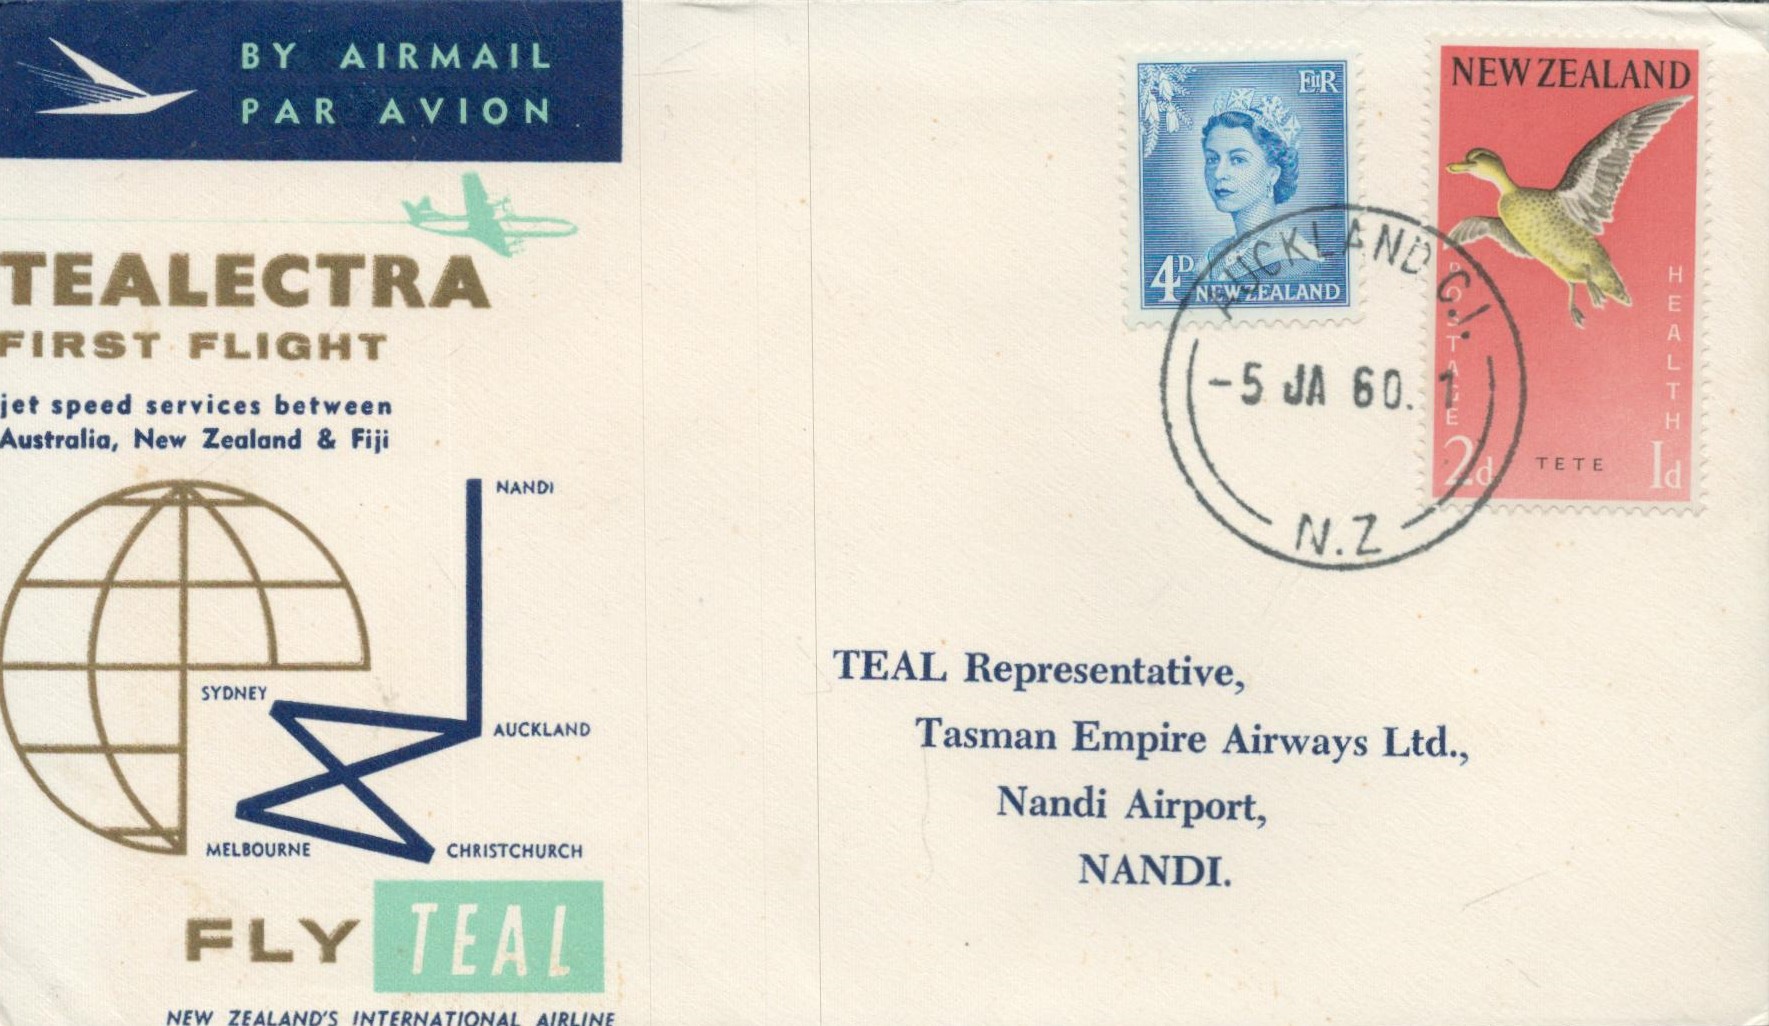 Aviation 1960 Tealectra first flight illustrated cover Australia. New Zealand and Fiji. 4d, 2d New